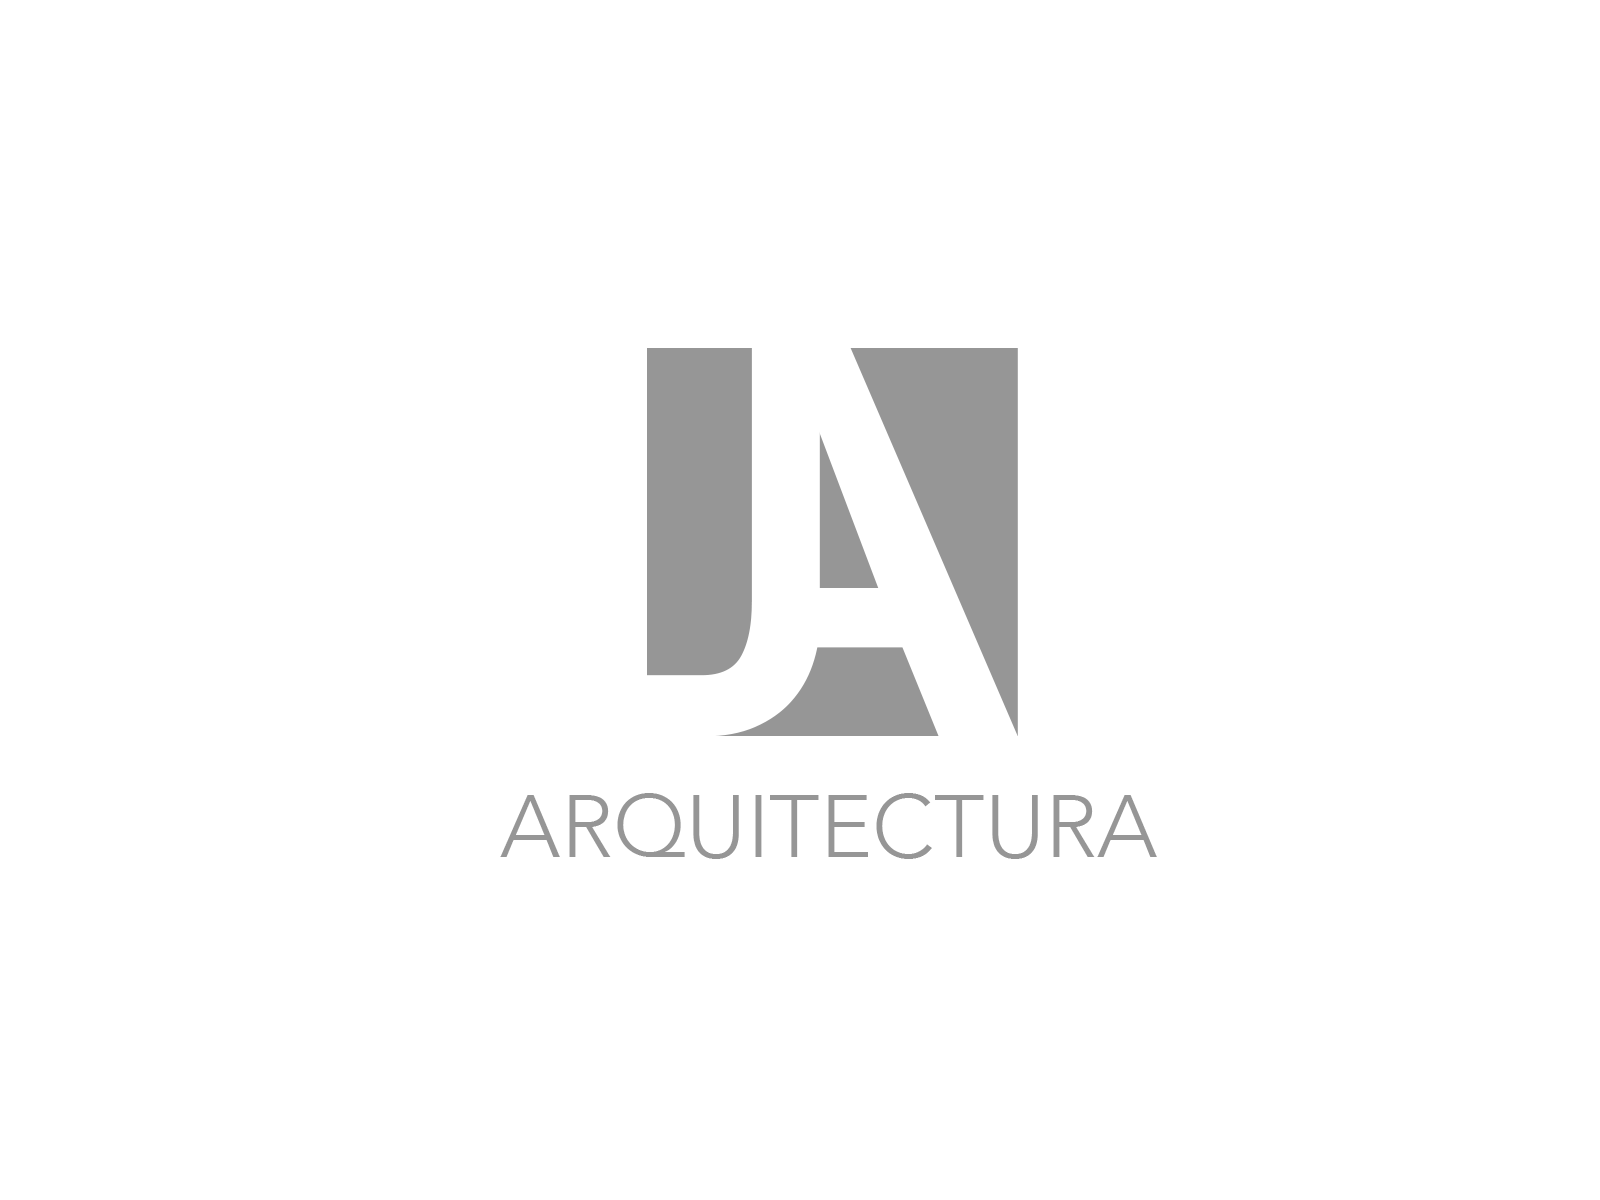 JA Arquitectura by David Cardeña on Dribbble